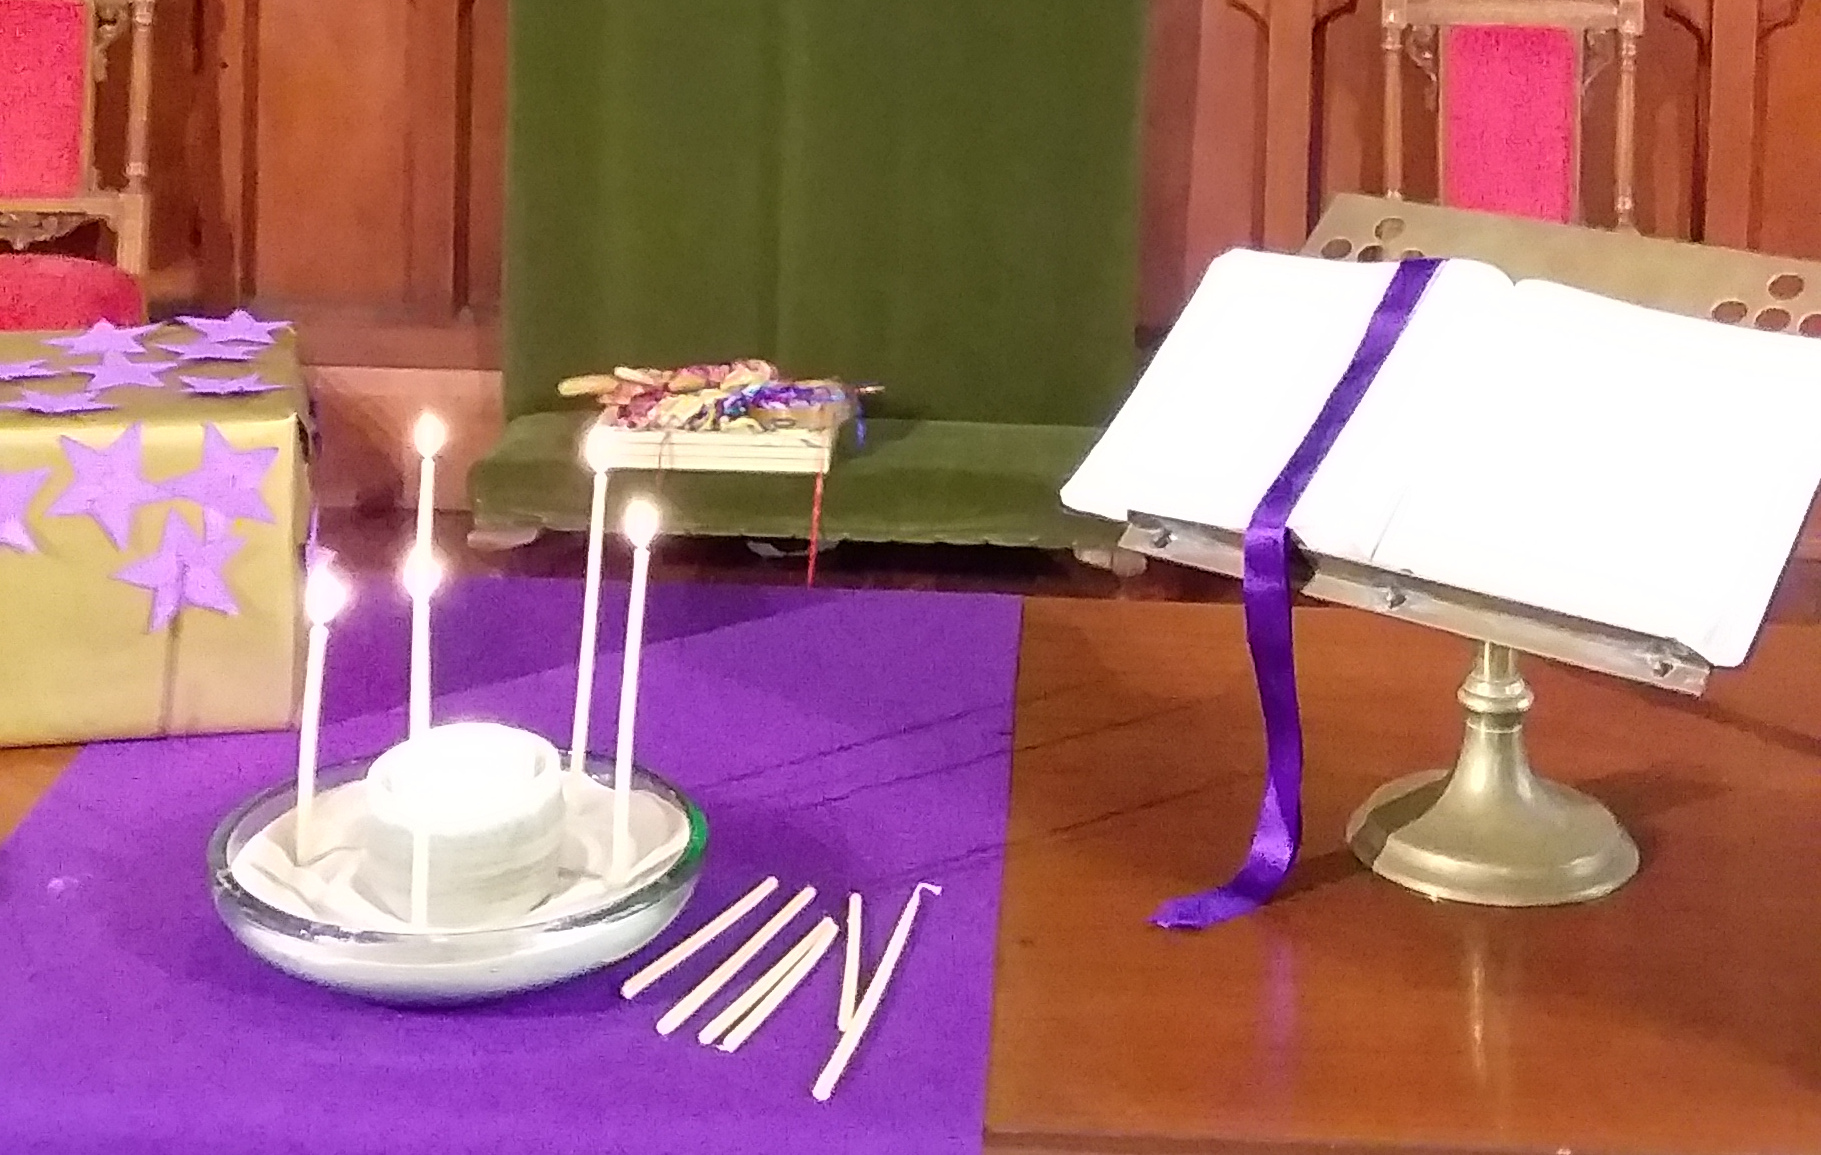 Candles in Armadale Uniting Church